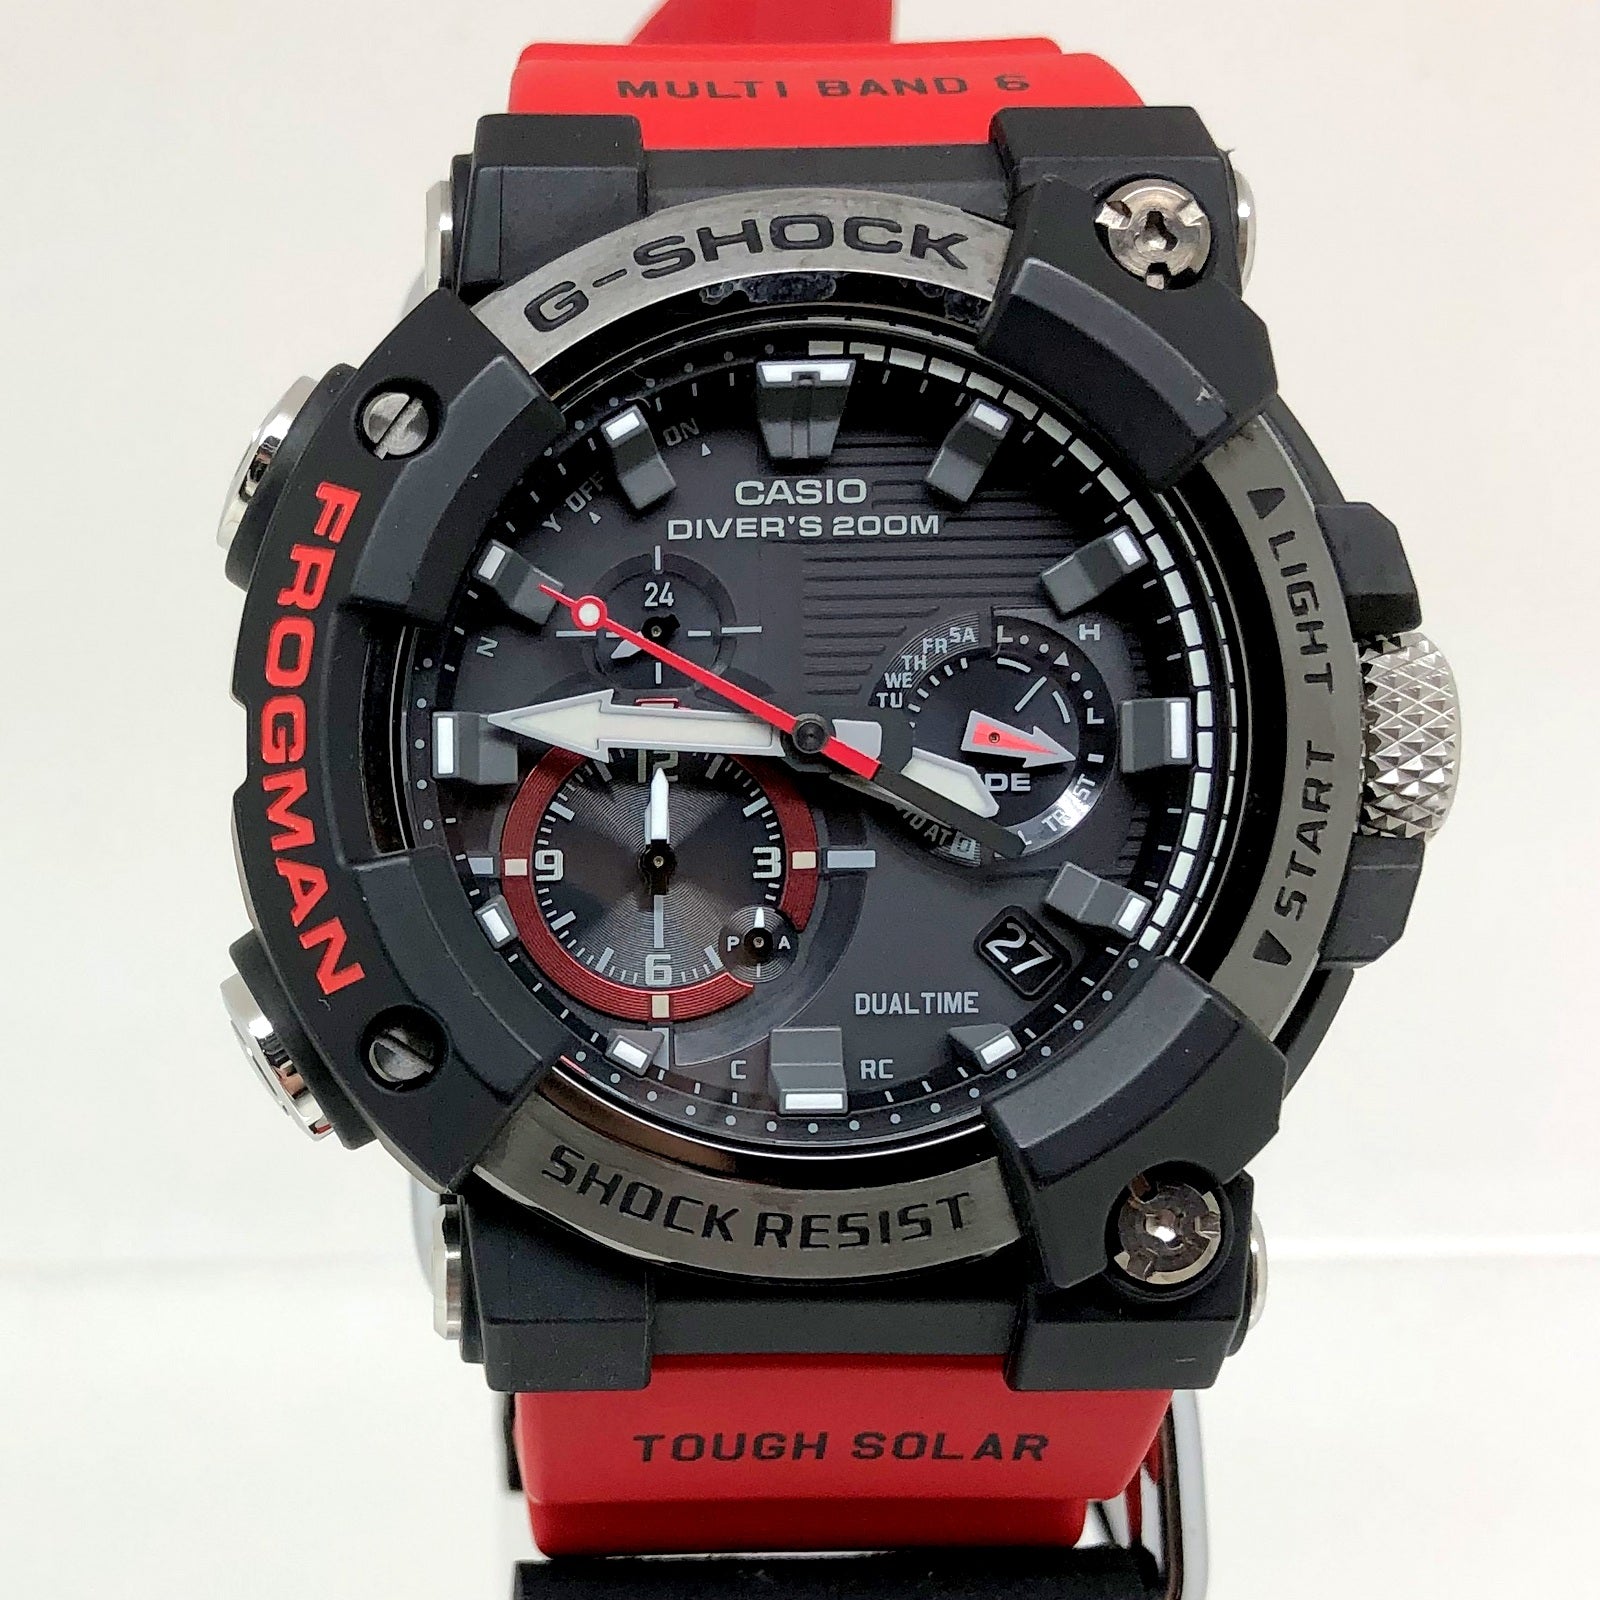 G-SHOCK GWF-A1000-1A4JF レッド特徴ダイバーズウォッチ - 腕時計(アナログ)